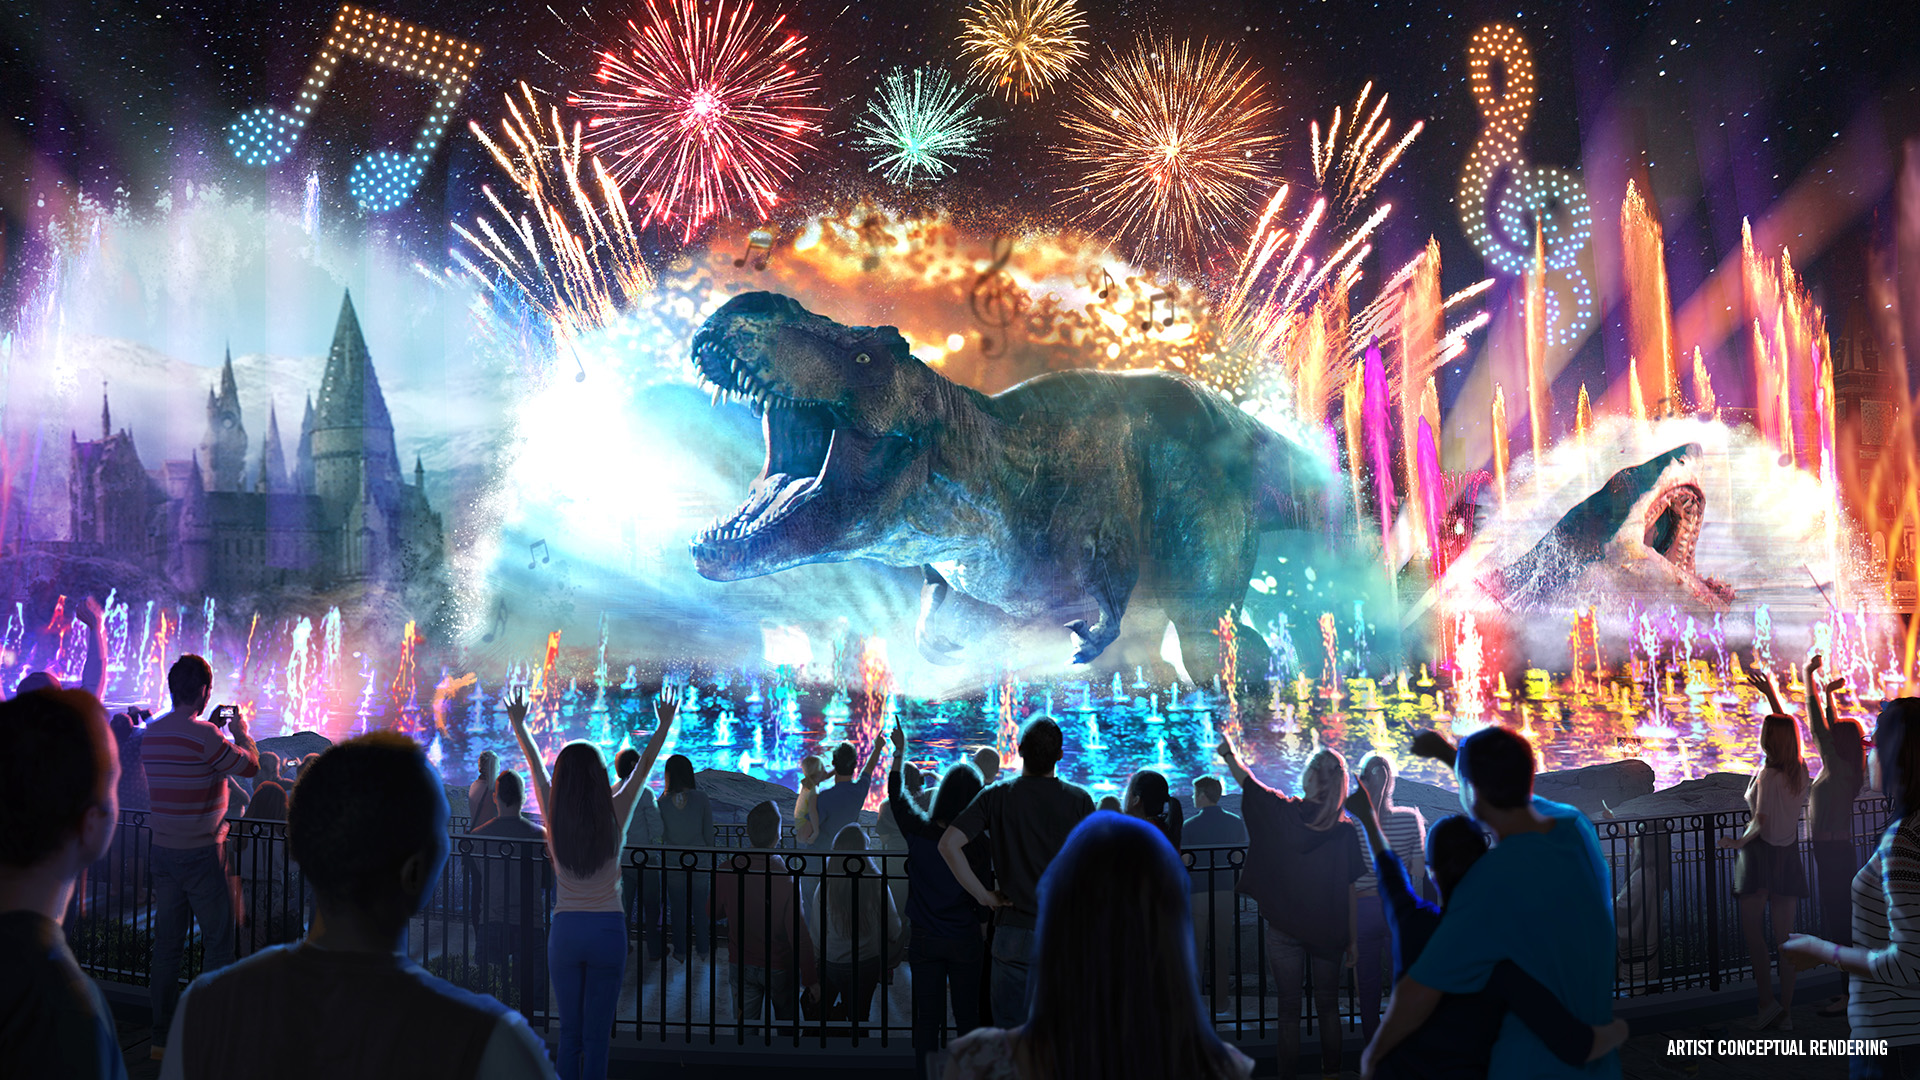 Jurassic to be Included in NEW Universal Orlando Shows Coming this Summer!